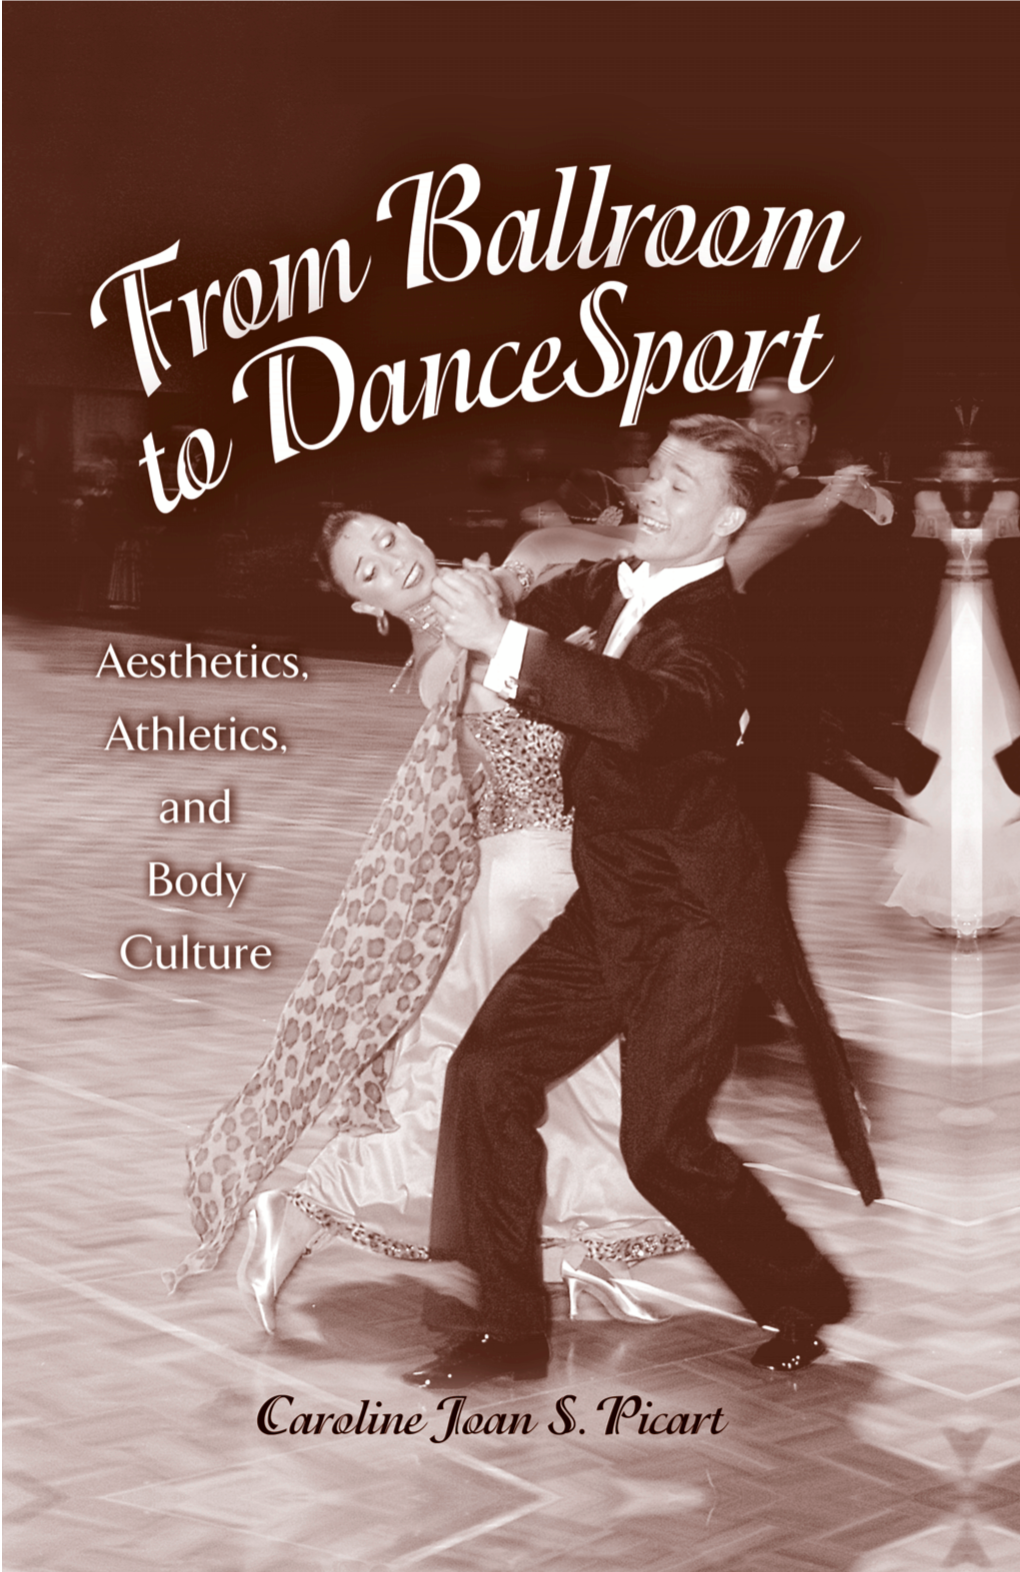 From Ballroom to Dancesport: Aesthetics, Athletics, and Body Culture (SUNY Series on Sport, Culture, and Social Relations)